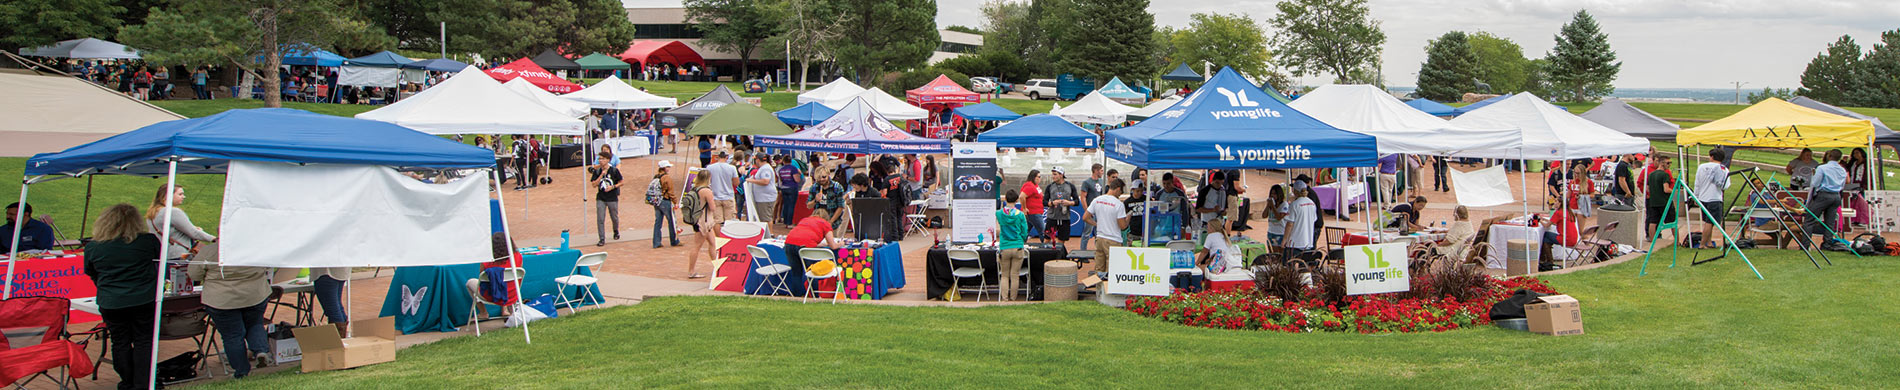 Student Employment and Involvement Festival on the campus of Colorado State University-Pueblo